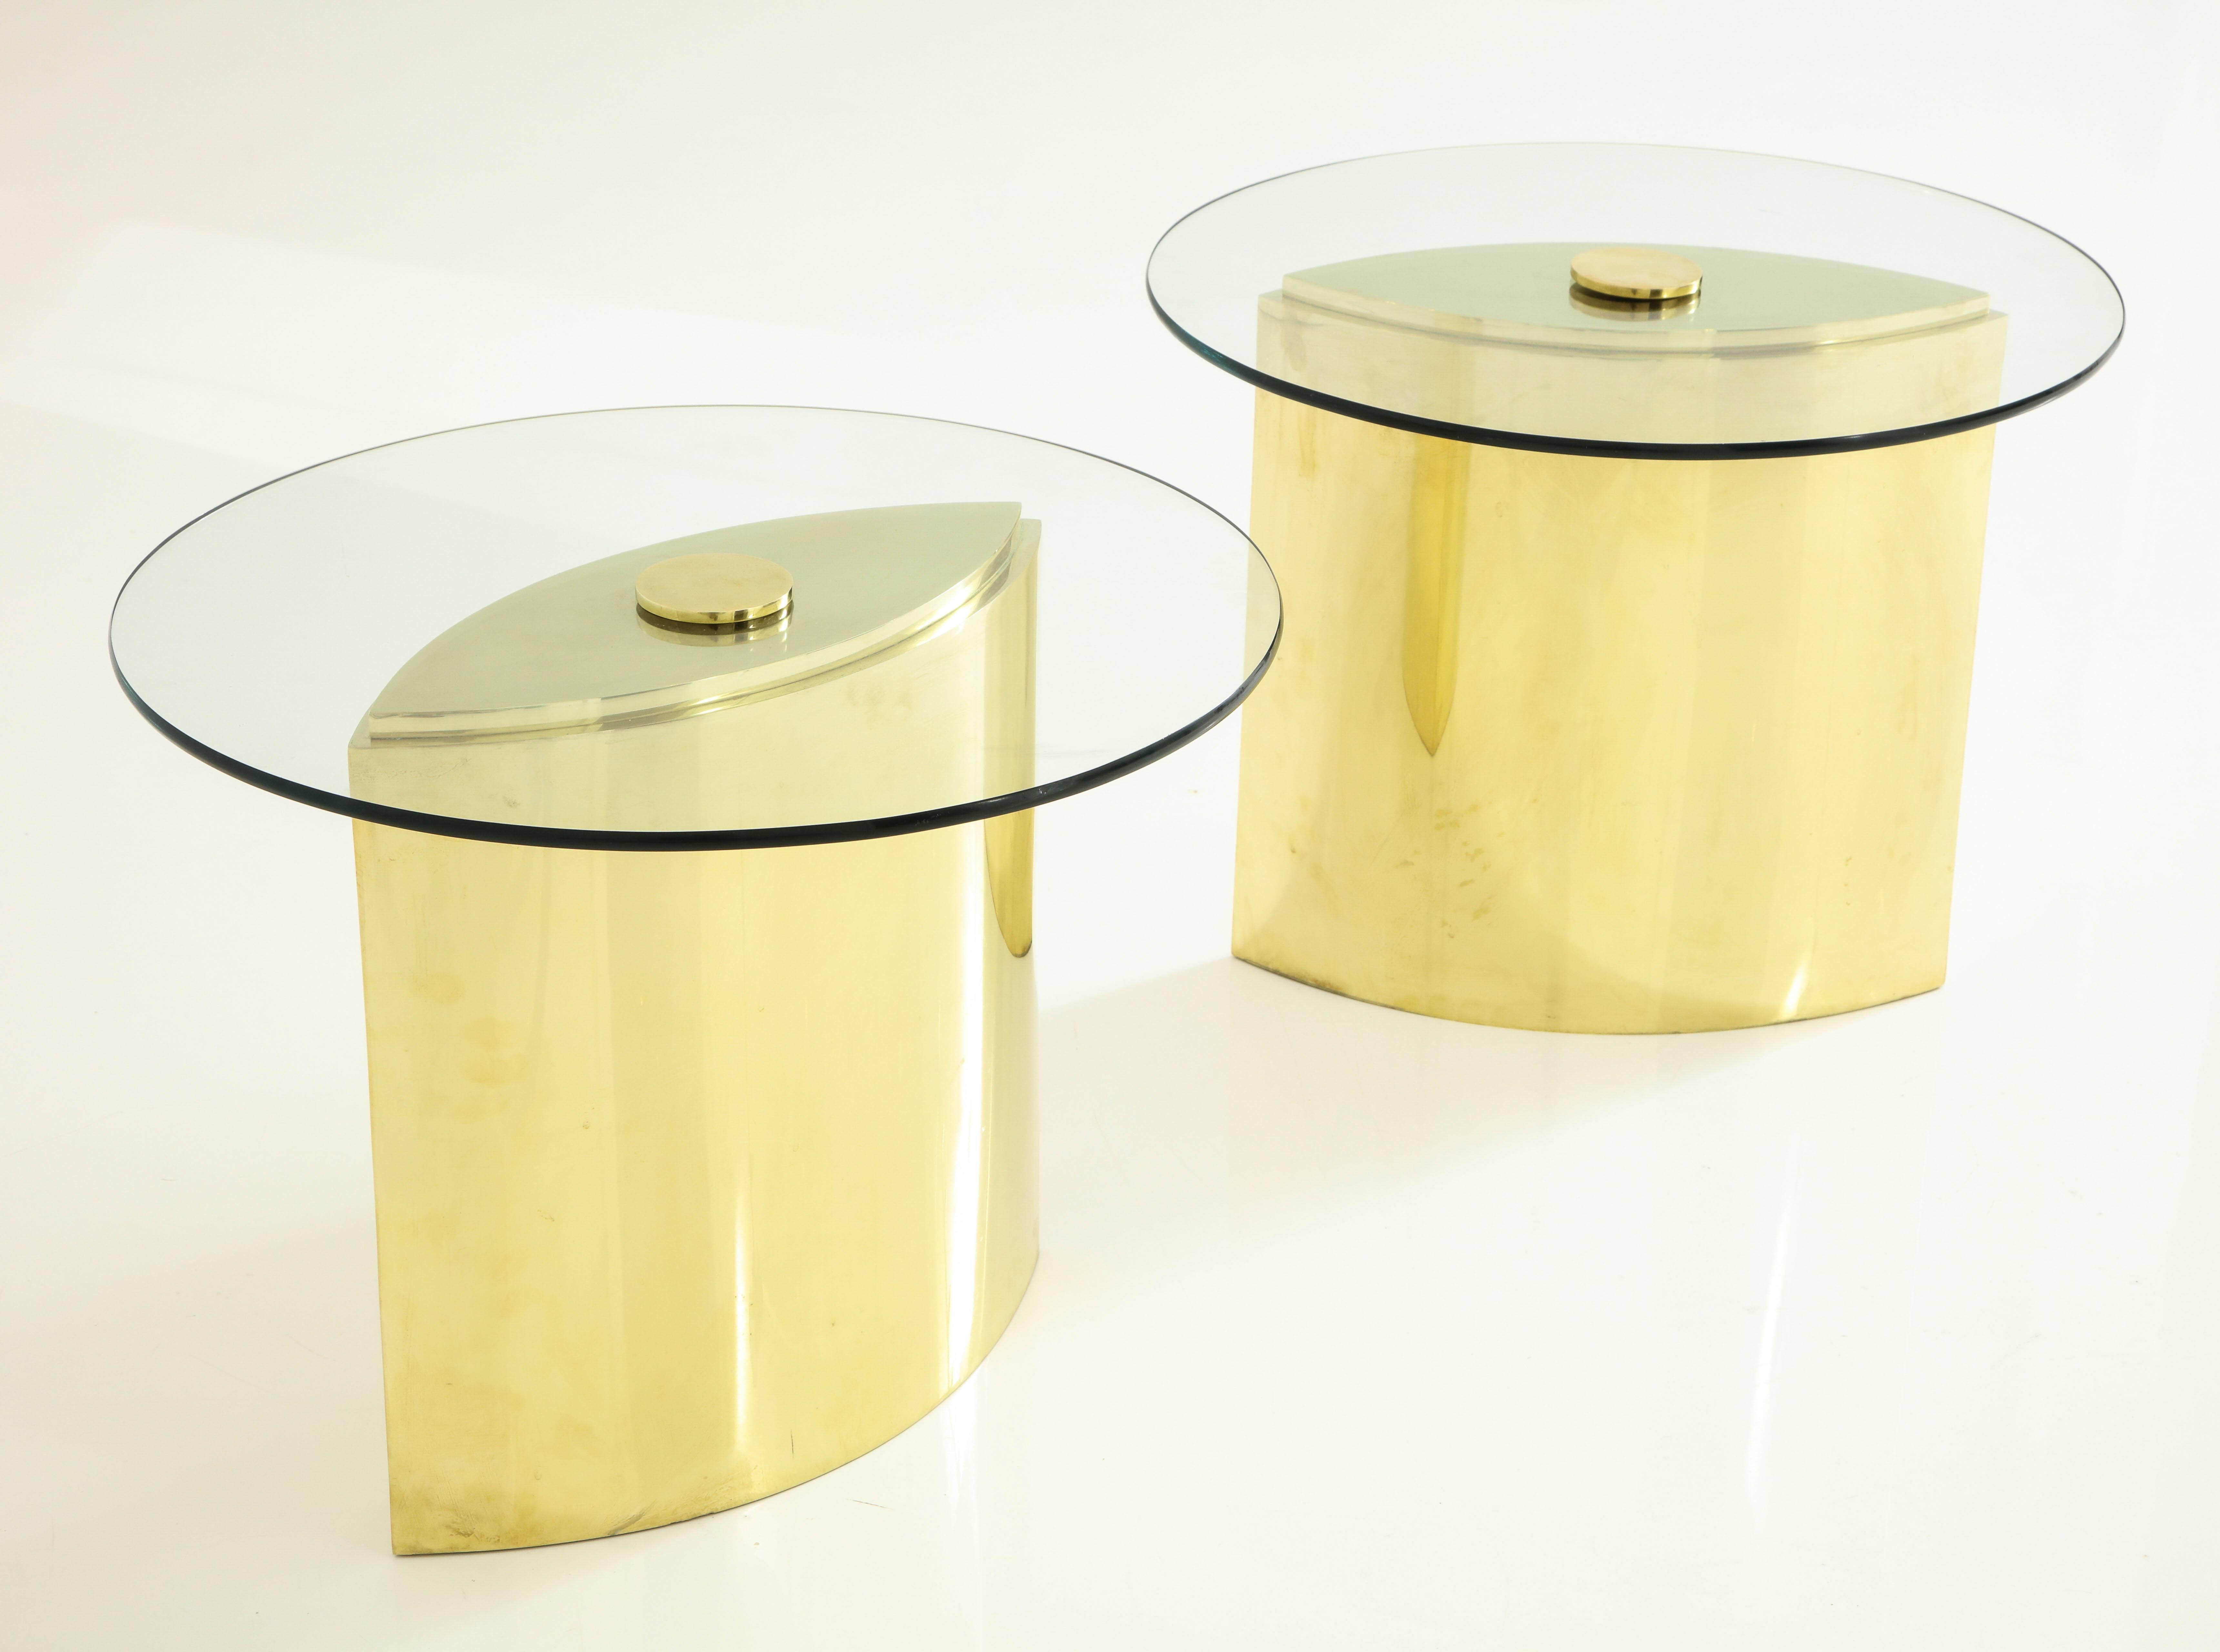 Pair of brass side tables by Steve Chase.
Wonderful 